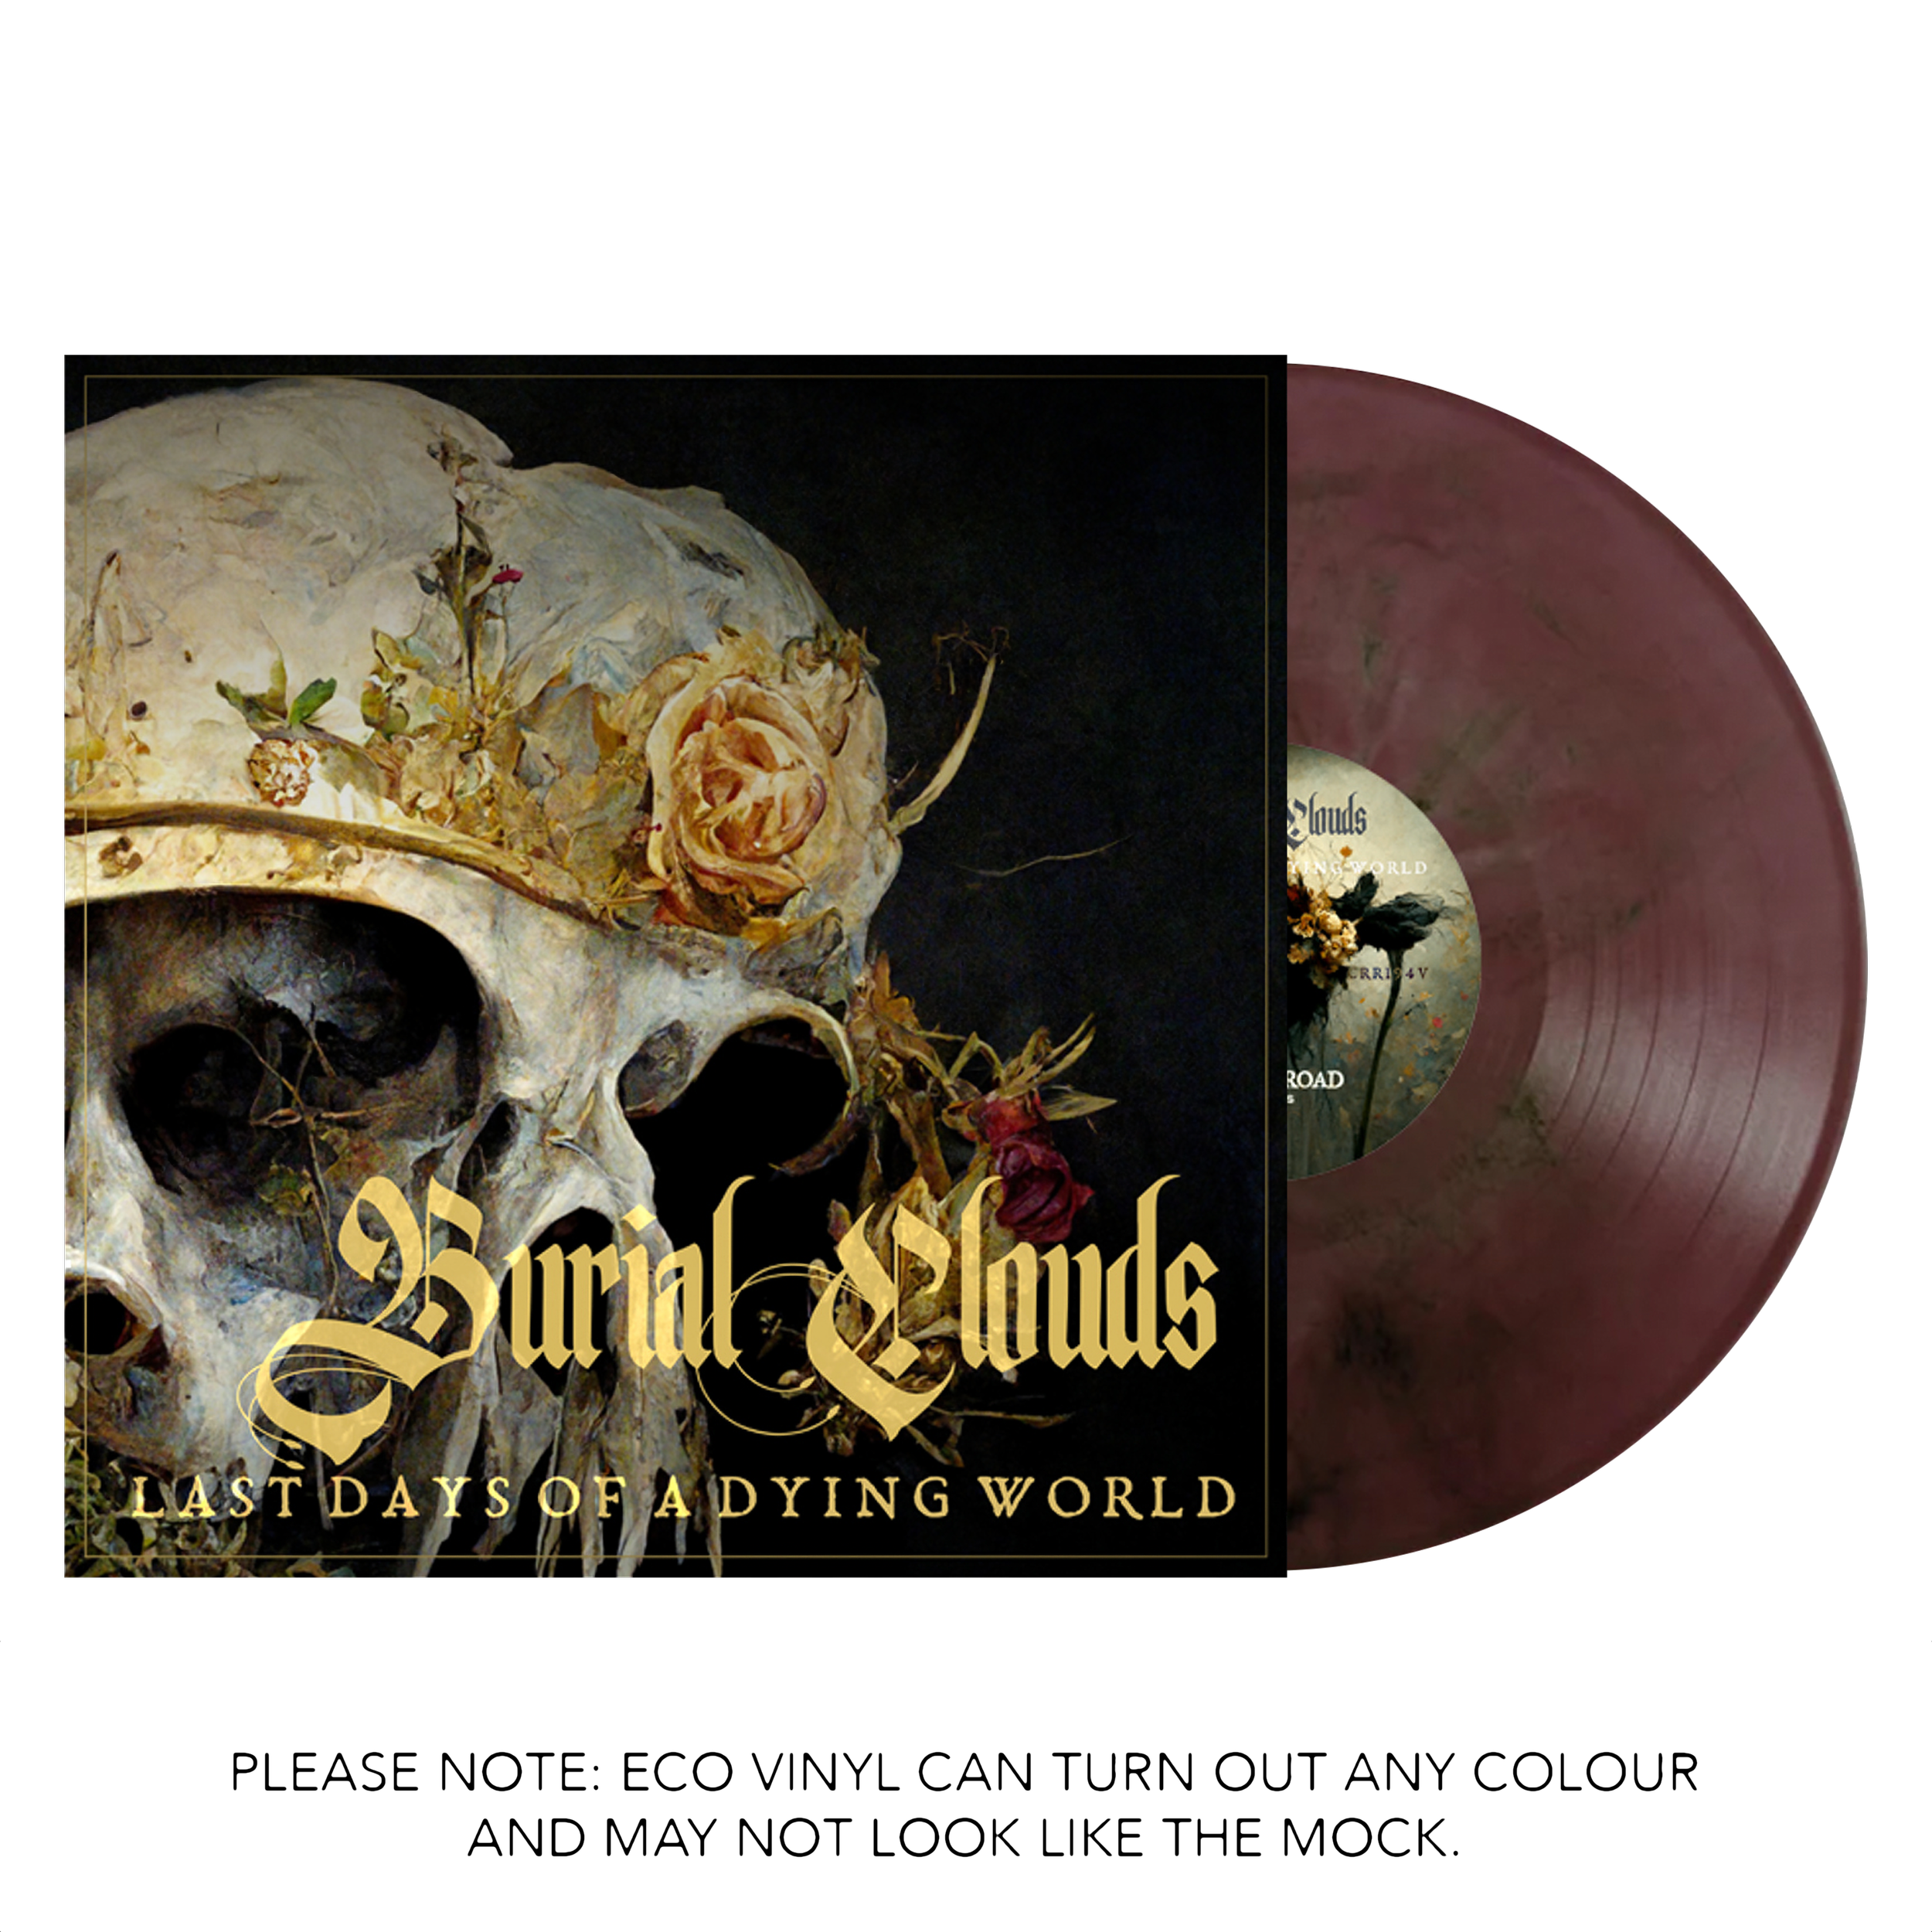 Burial Clouds - Last Day Of A Dying World - Vinyl - Eco.png